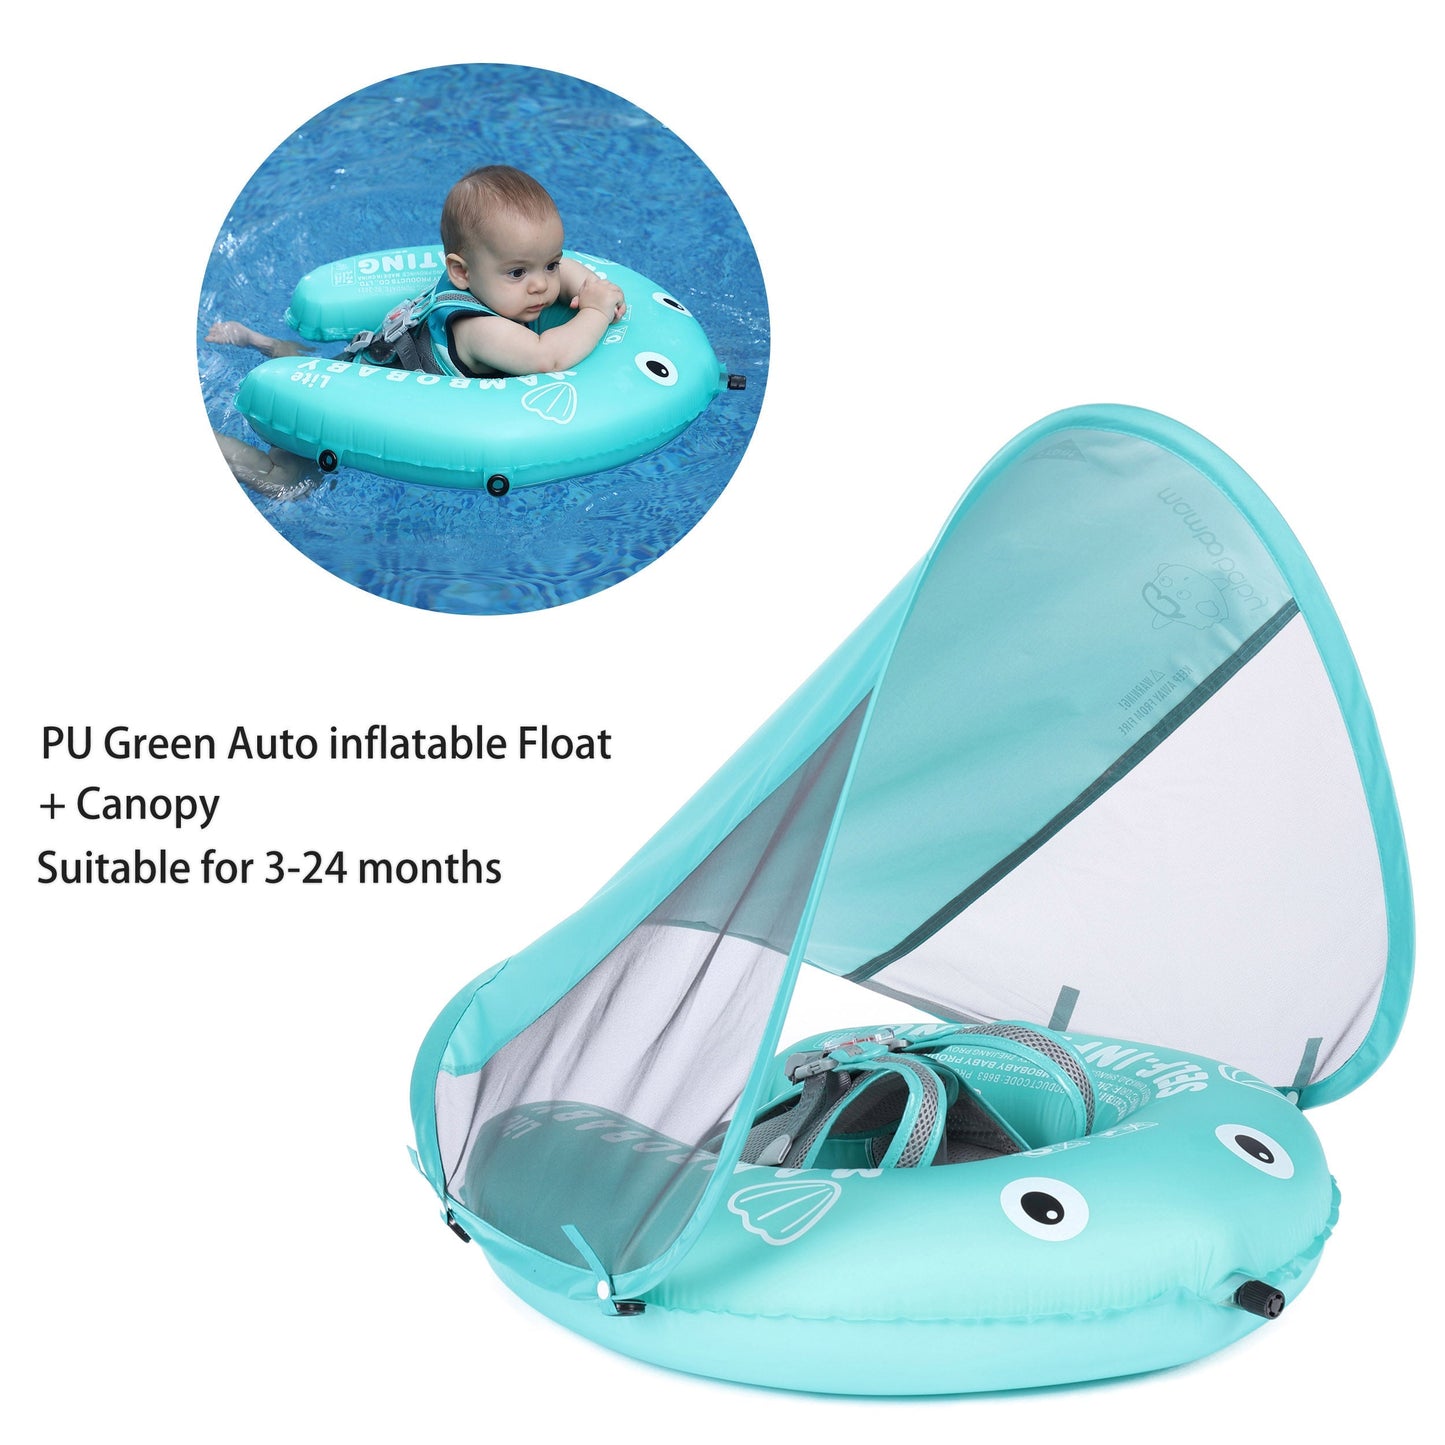 Mambobaby Swimming Ring with Sun Canopy